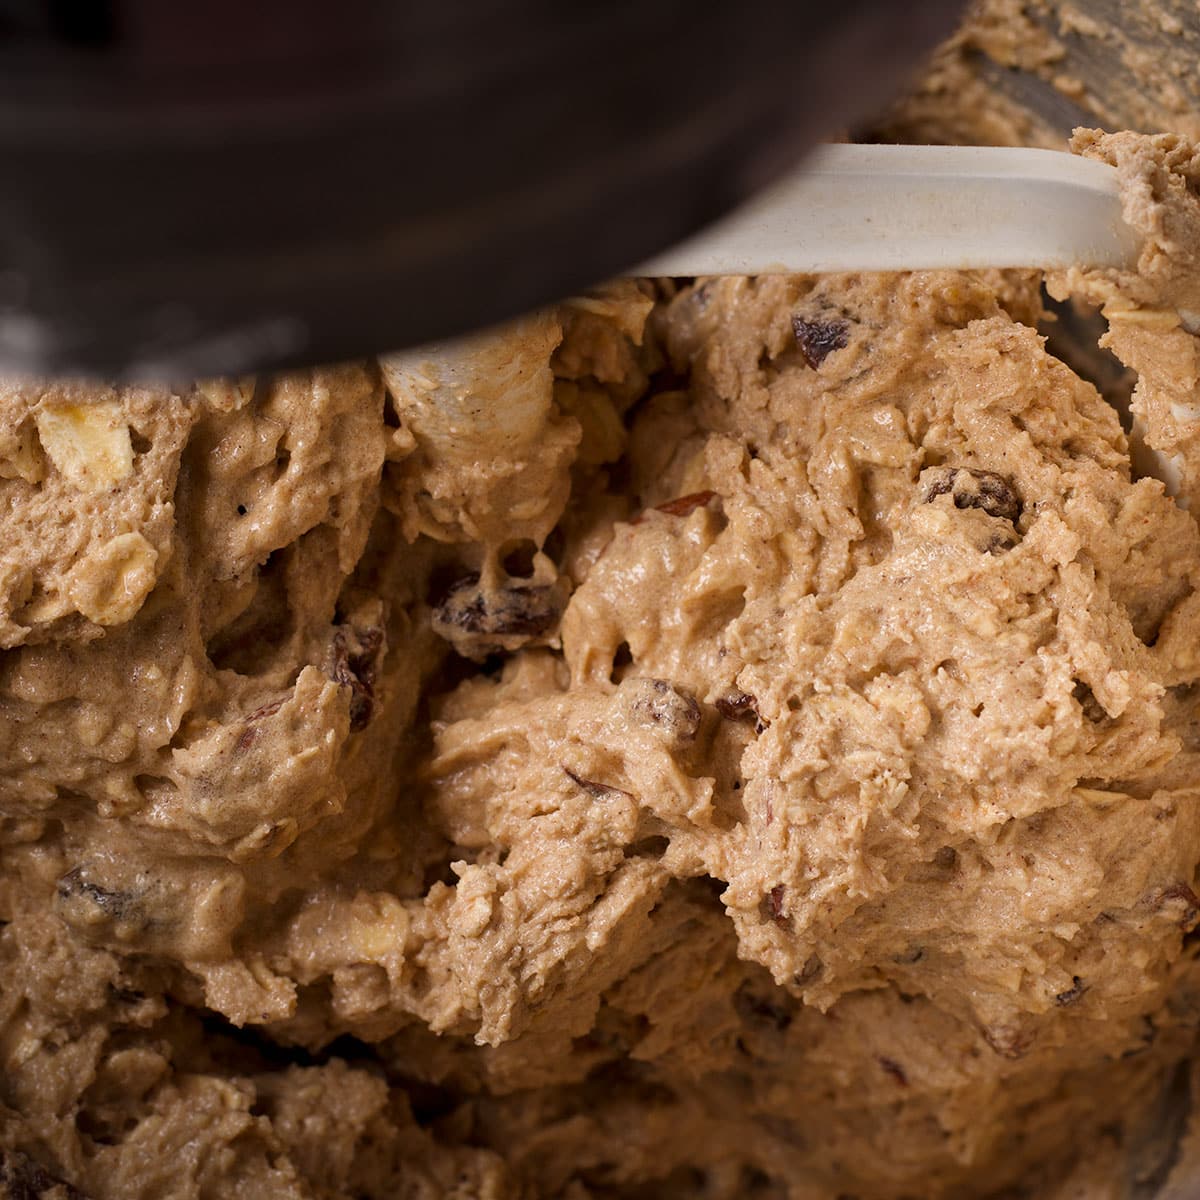 Mix the almonds, eggs, and raisins into the cookie dough. 